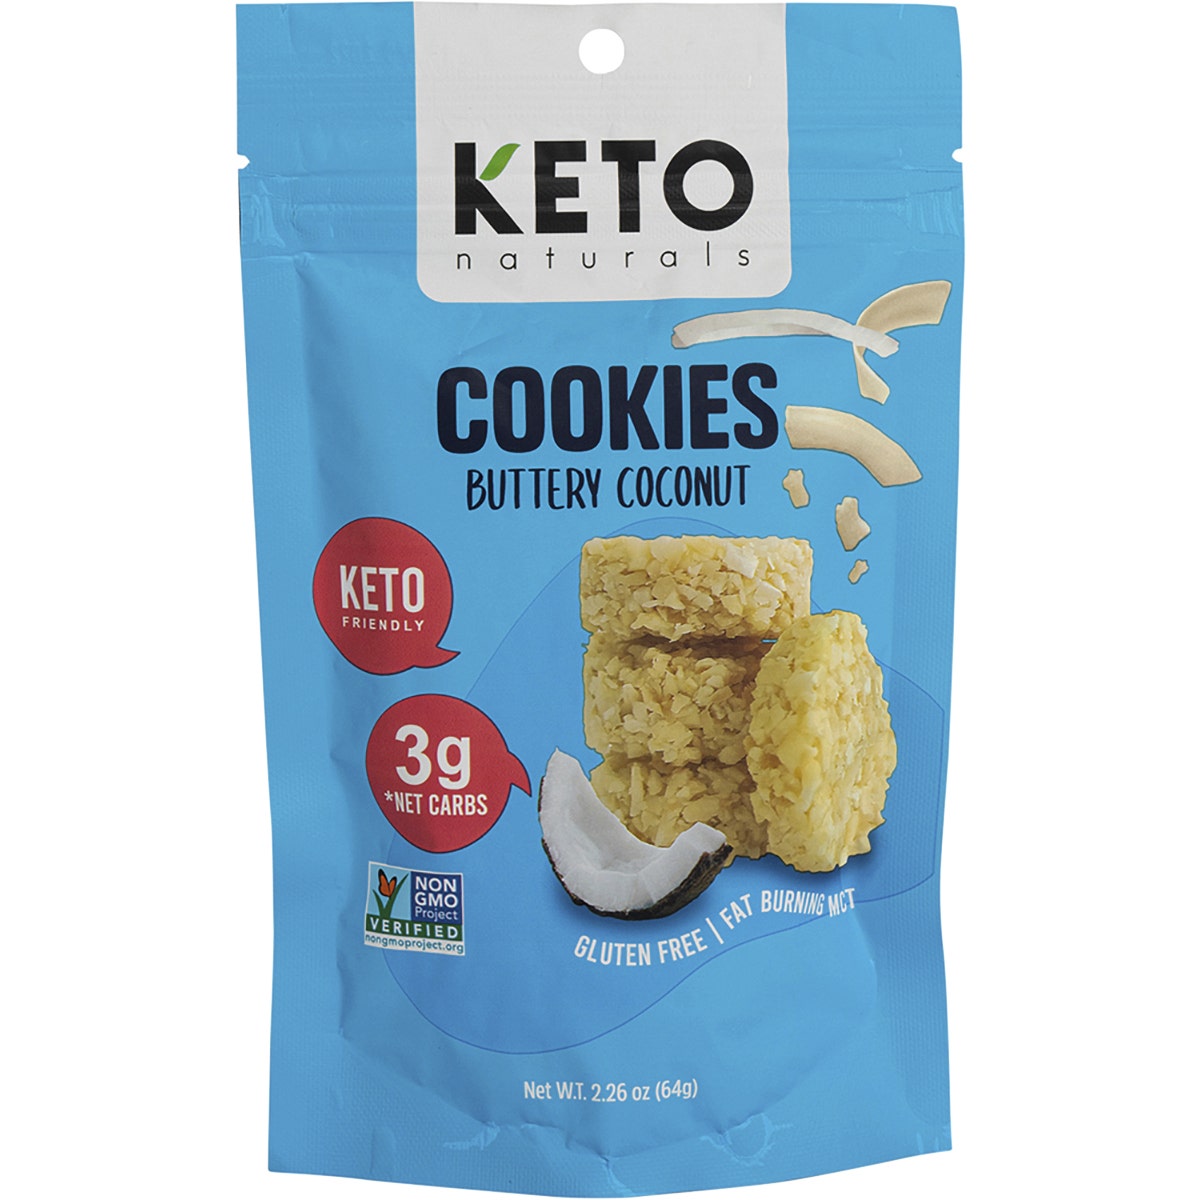 (CLEARANCE) Keto Naturals Cookies Buttery Coconut - 8 x 64g